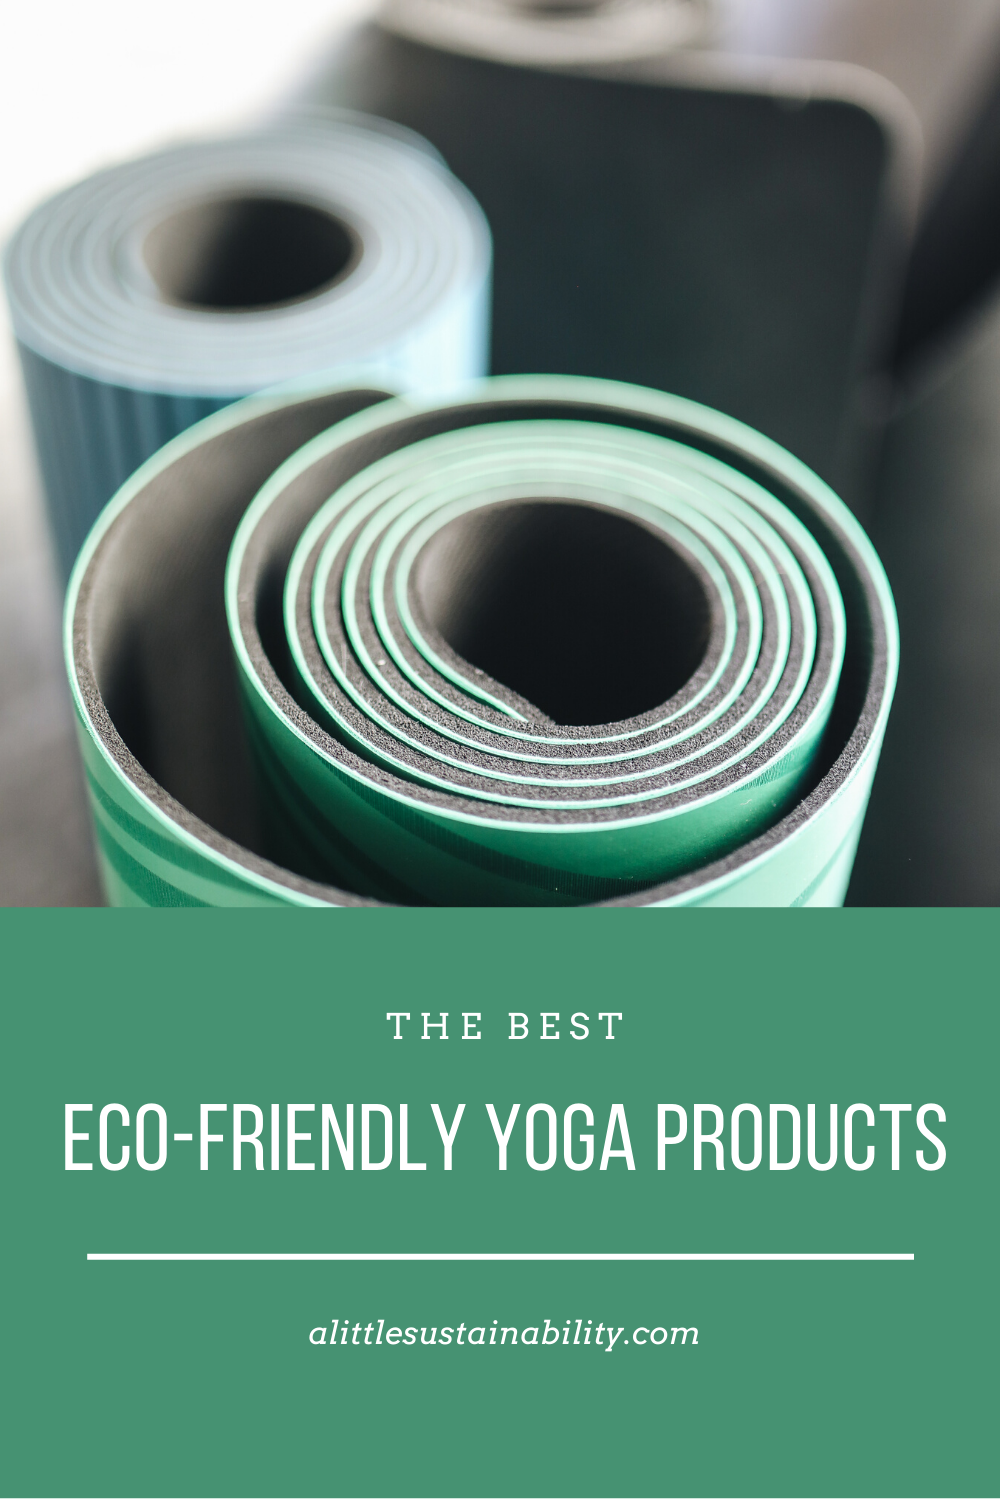 A huge list of the best eco-friendly yoga products. All these yoga accessories are made sustainable and each yoga brand is ethical and contributes to eco causes. In this guide there are eco yoga mats, yoga blocks, yoga straps, yoga wheels, bags, and more yoga props that are sustainable. #yogacorner #yogaessentials #yogagear www.alittlesustainability.com